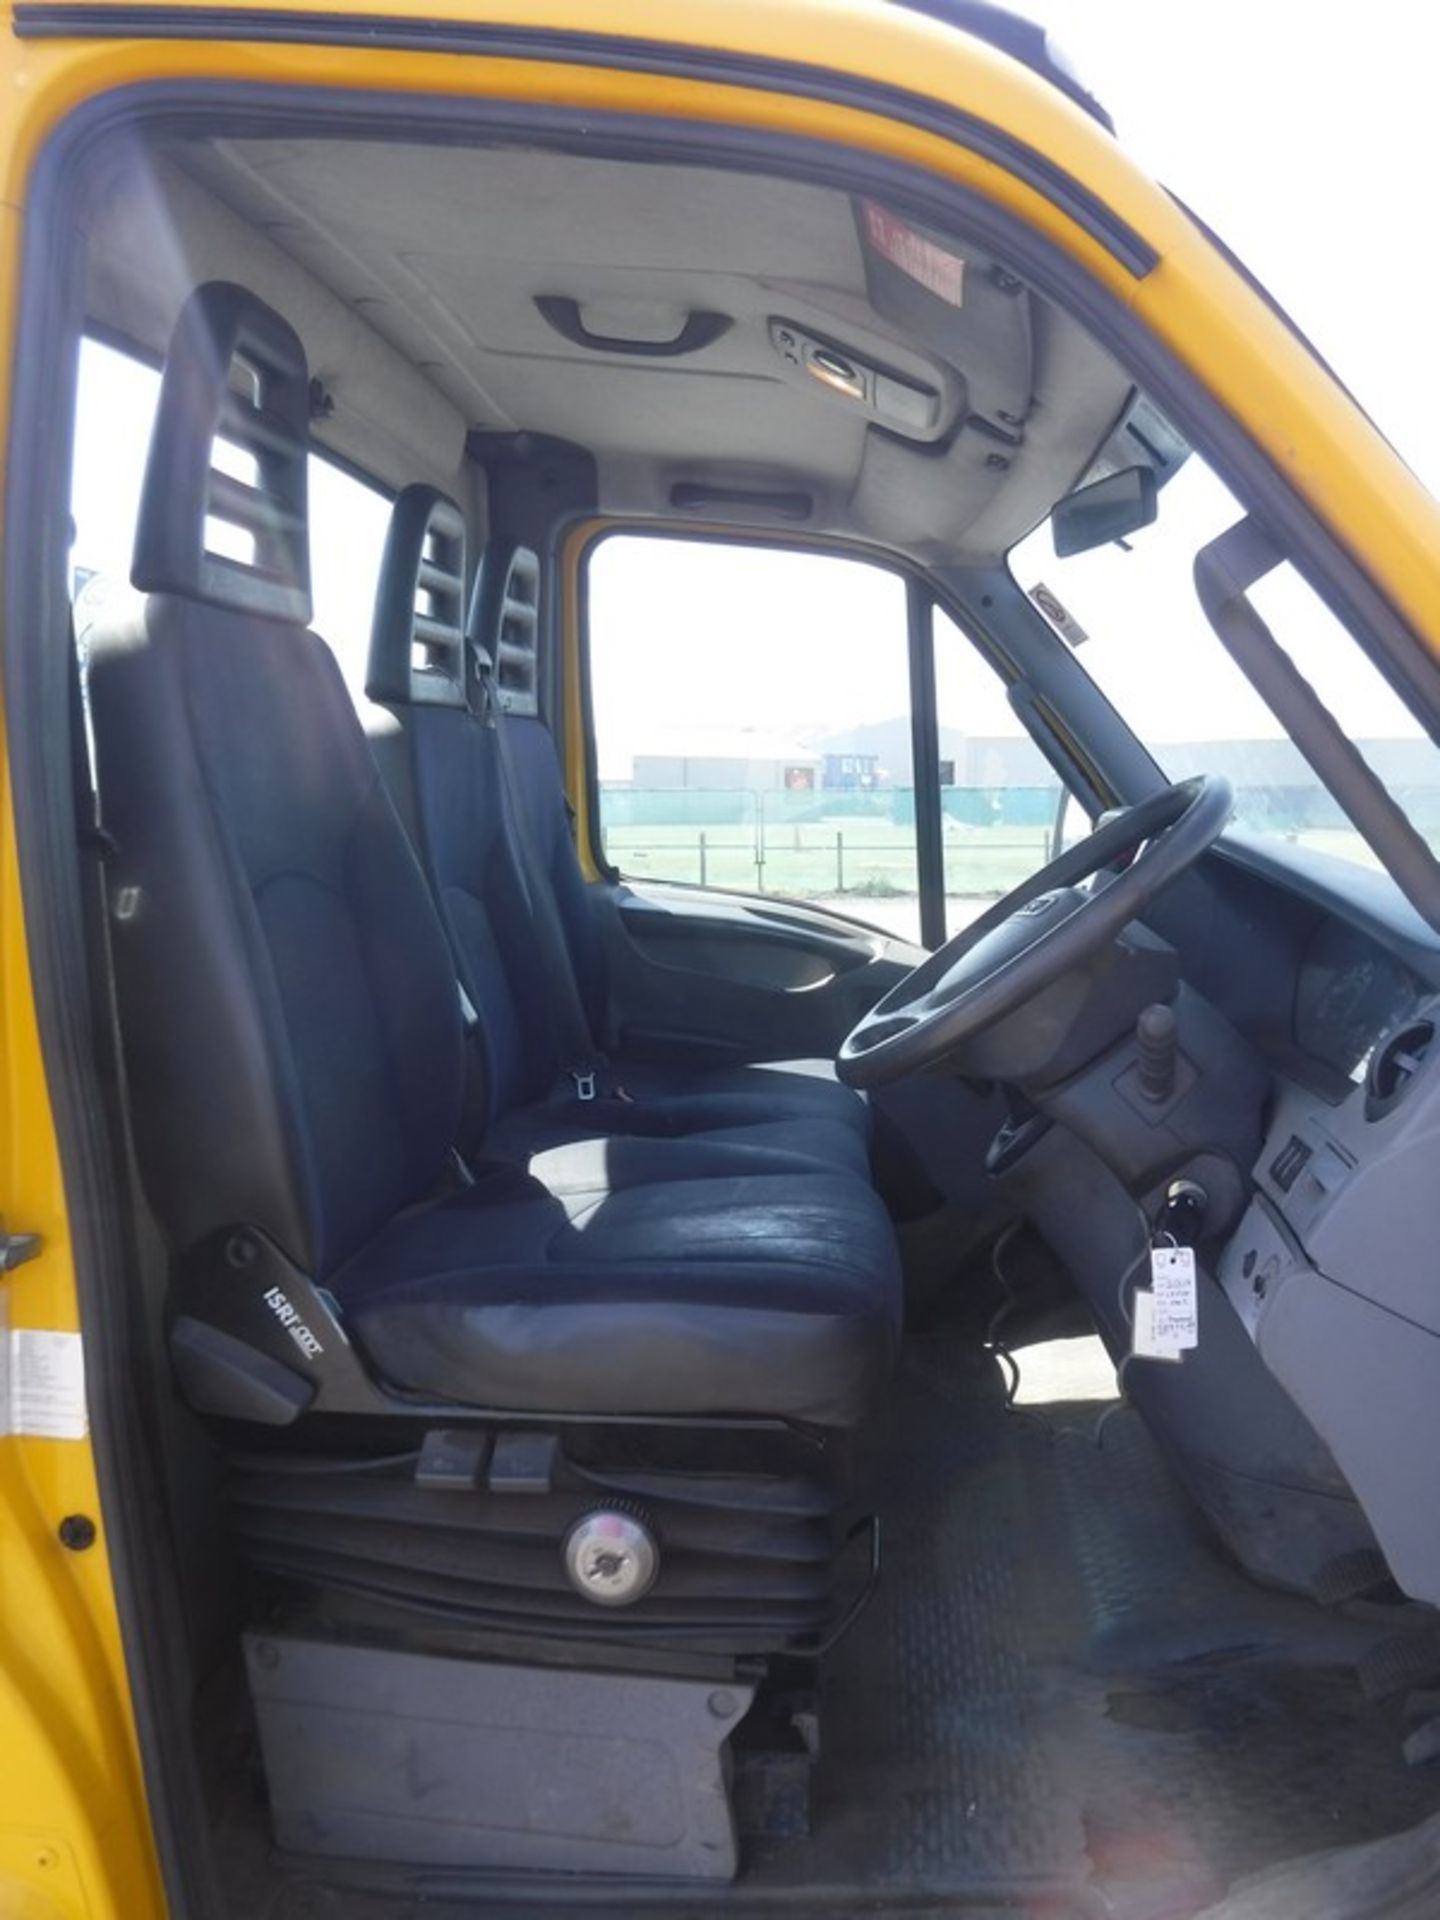 IVECO DAILY 65C18 - 2998cc - Image 3 of 30